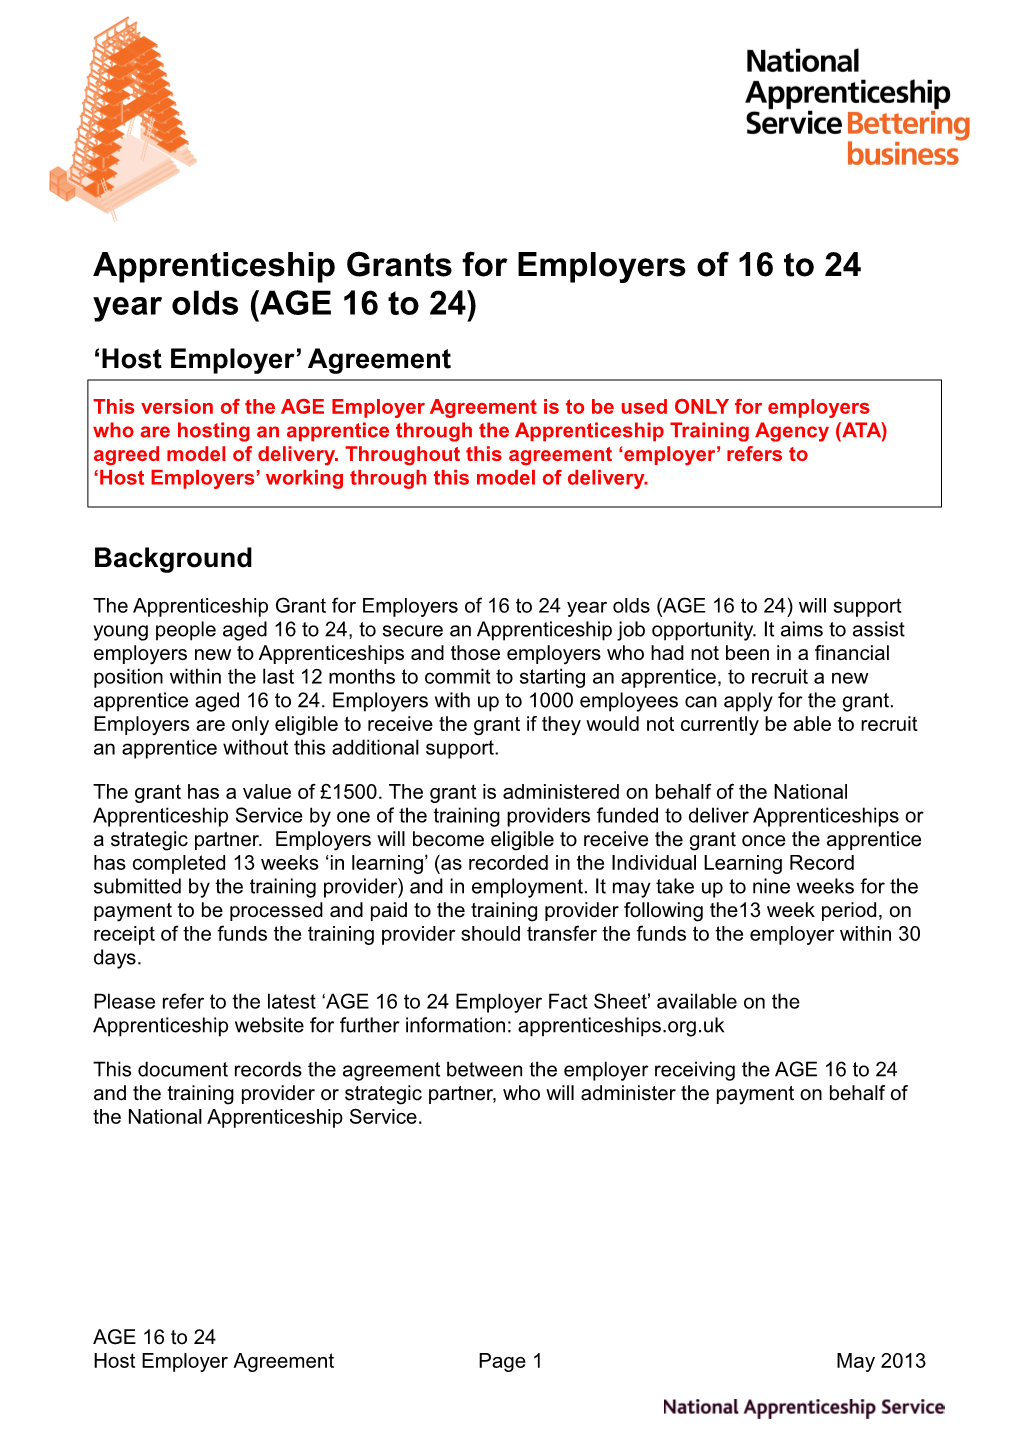 Apprenticeship Grants for Employers of 16 to 24 Year Olds(AGE 16 to 24)